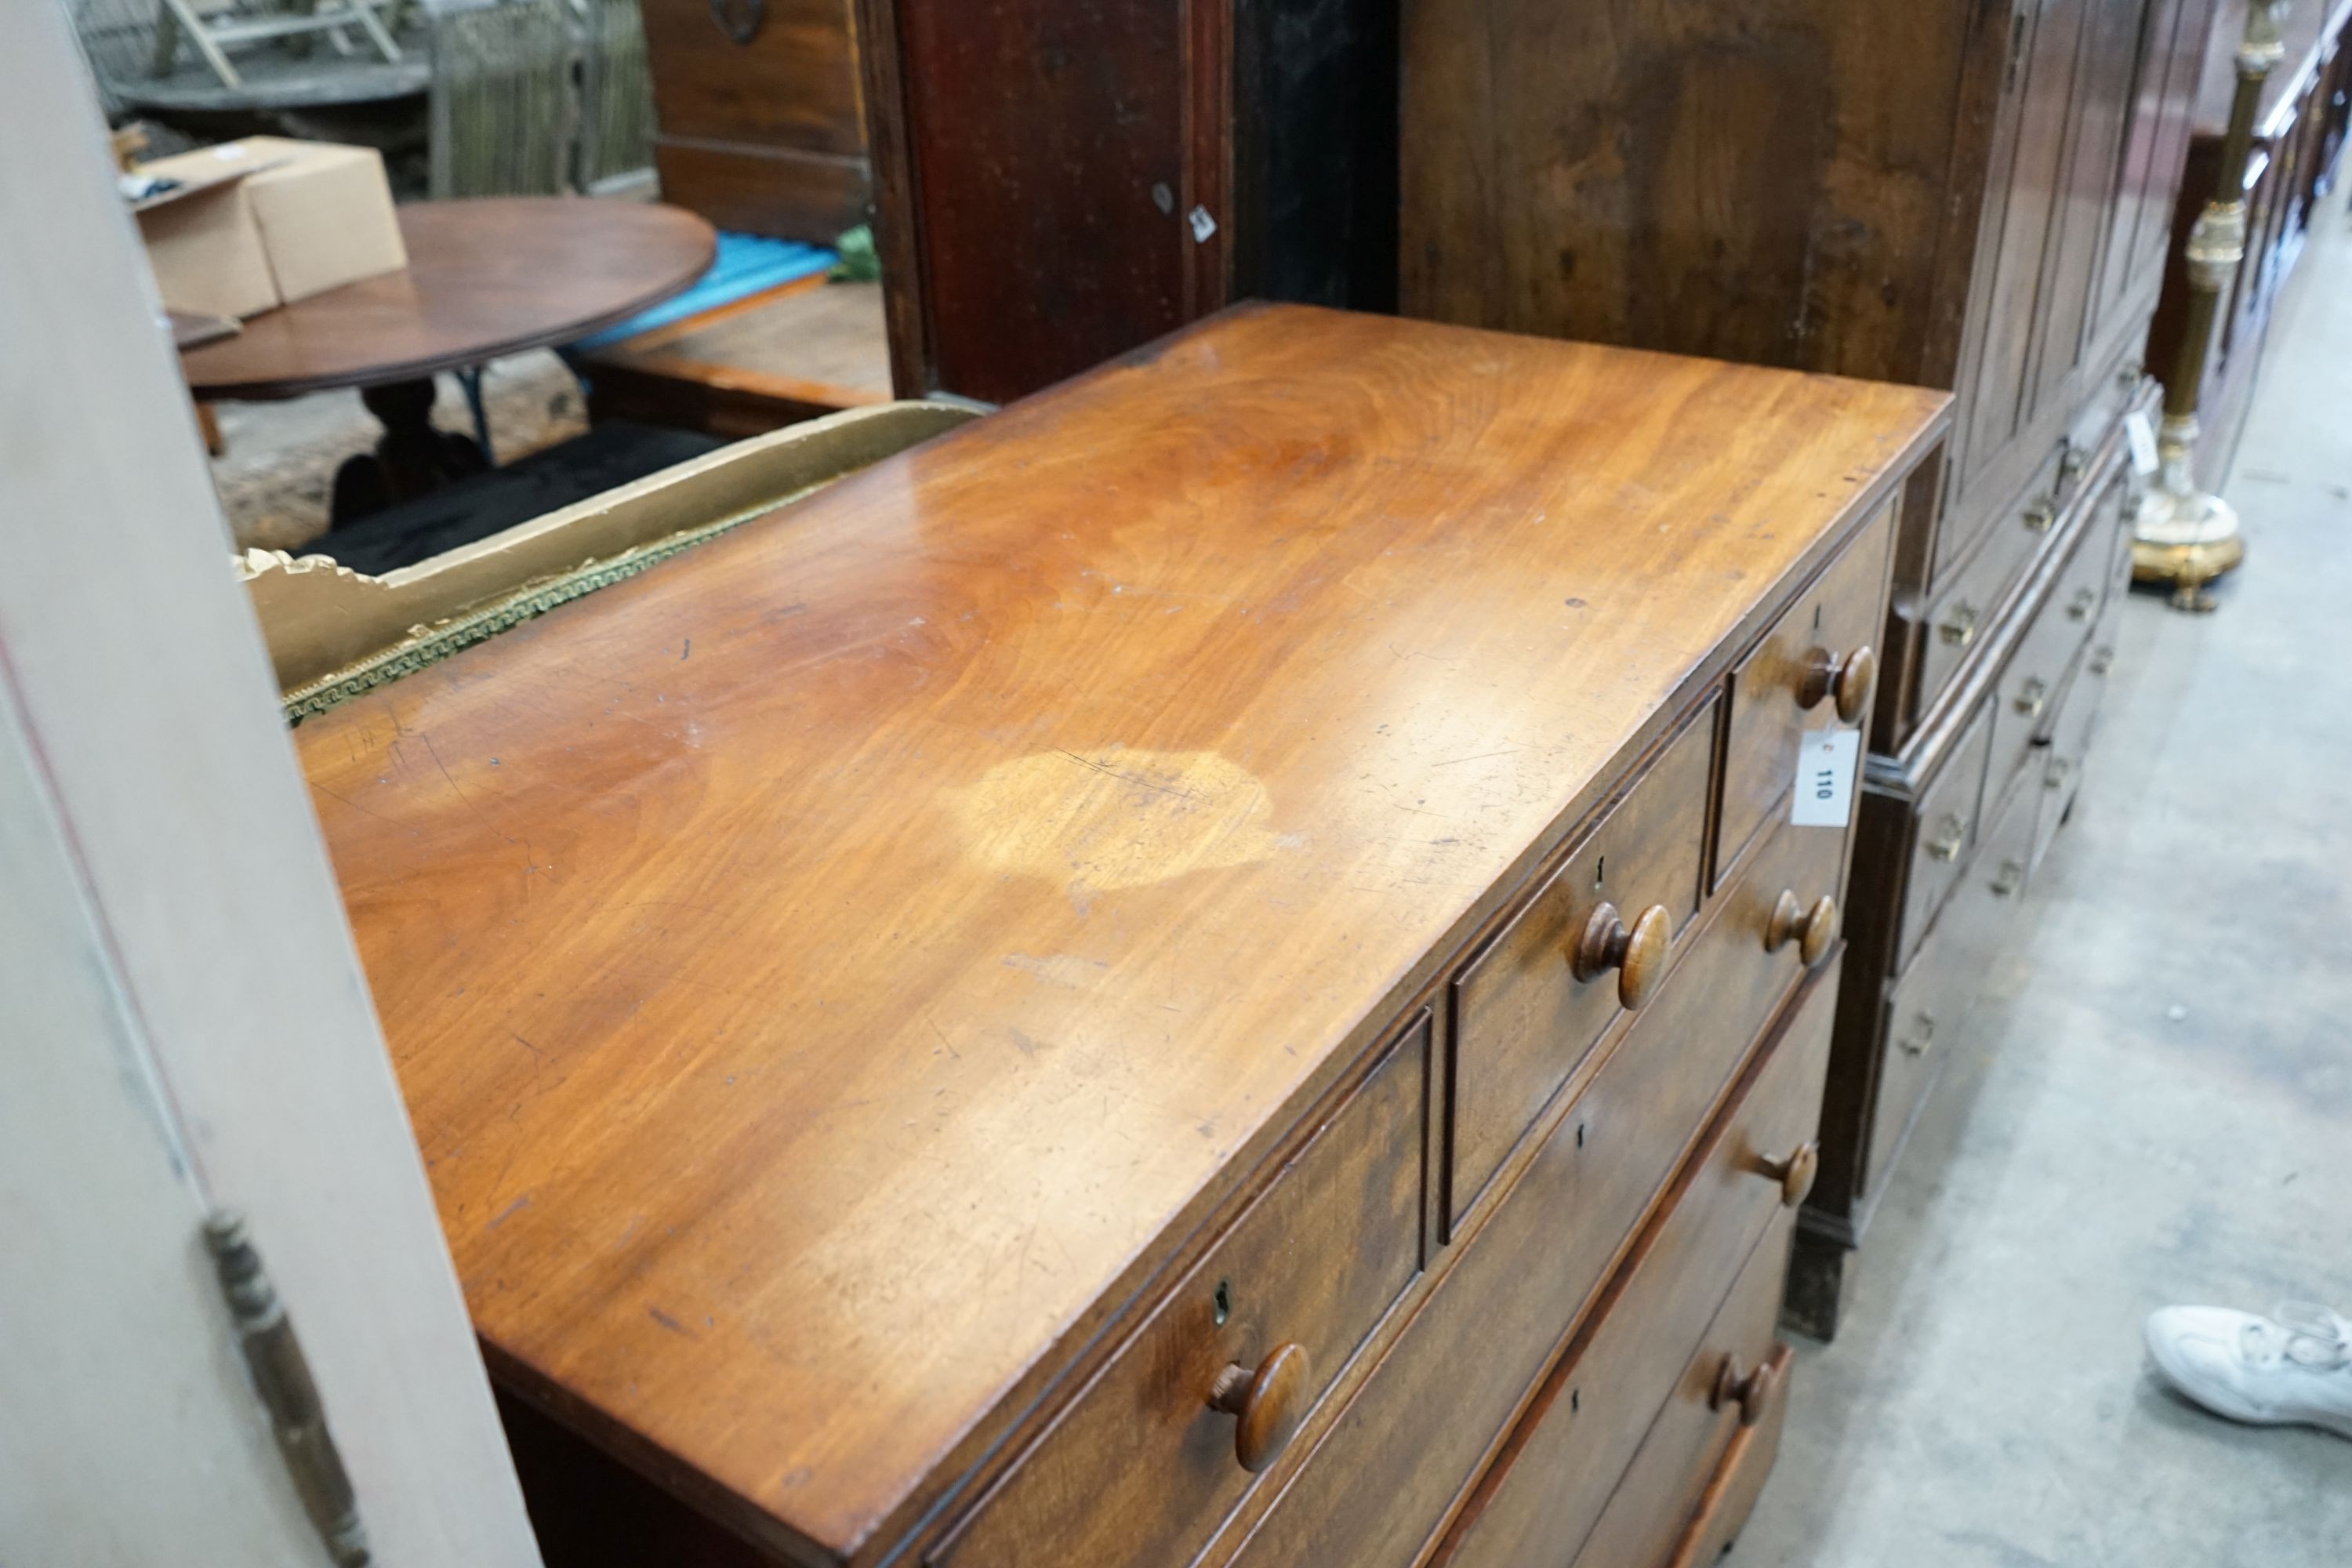 An early Victorian mahogany chest of three short and three long drawers, width 110cm, depth 58cm, height 105cm